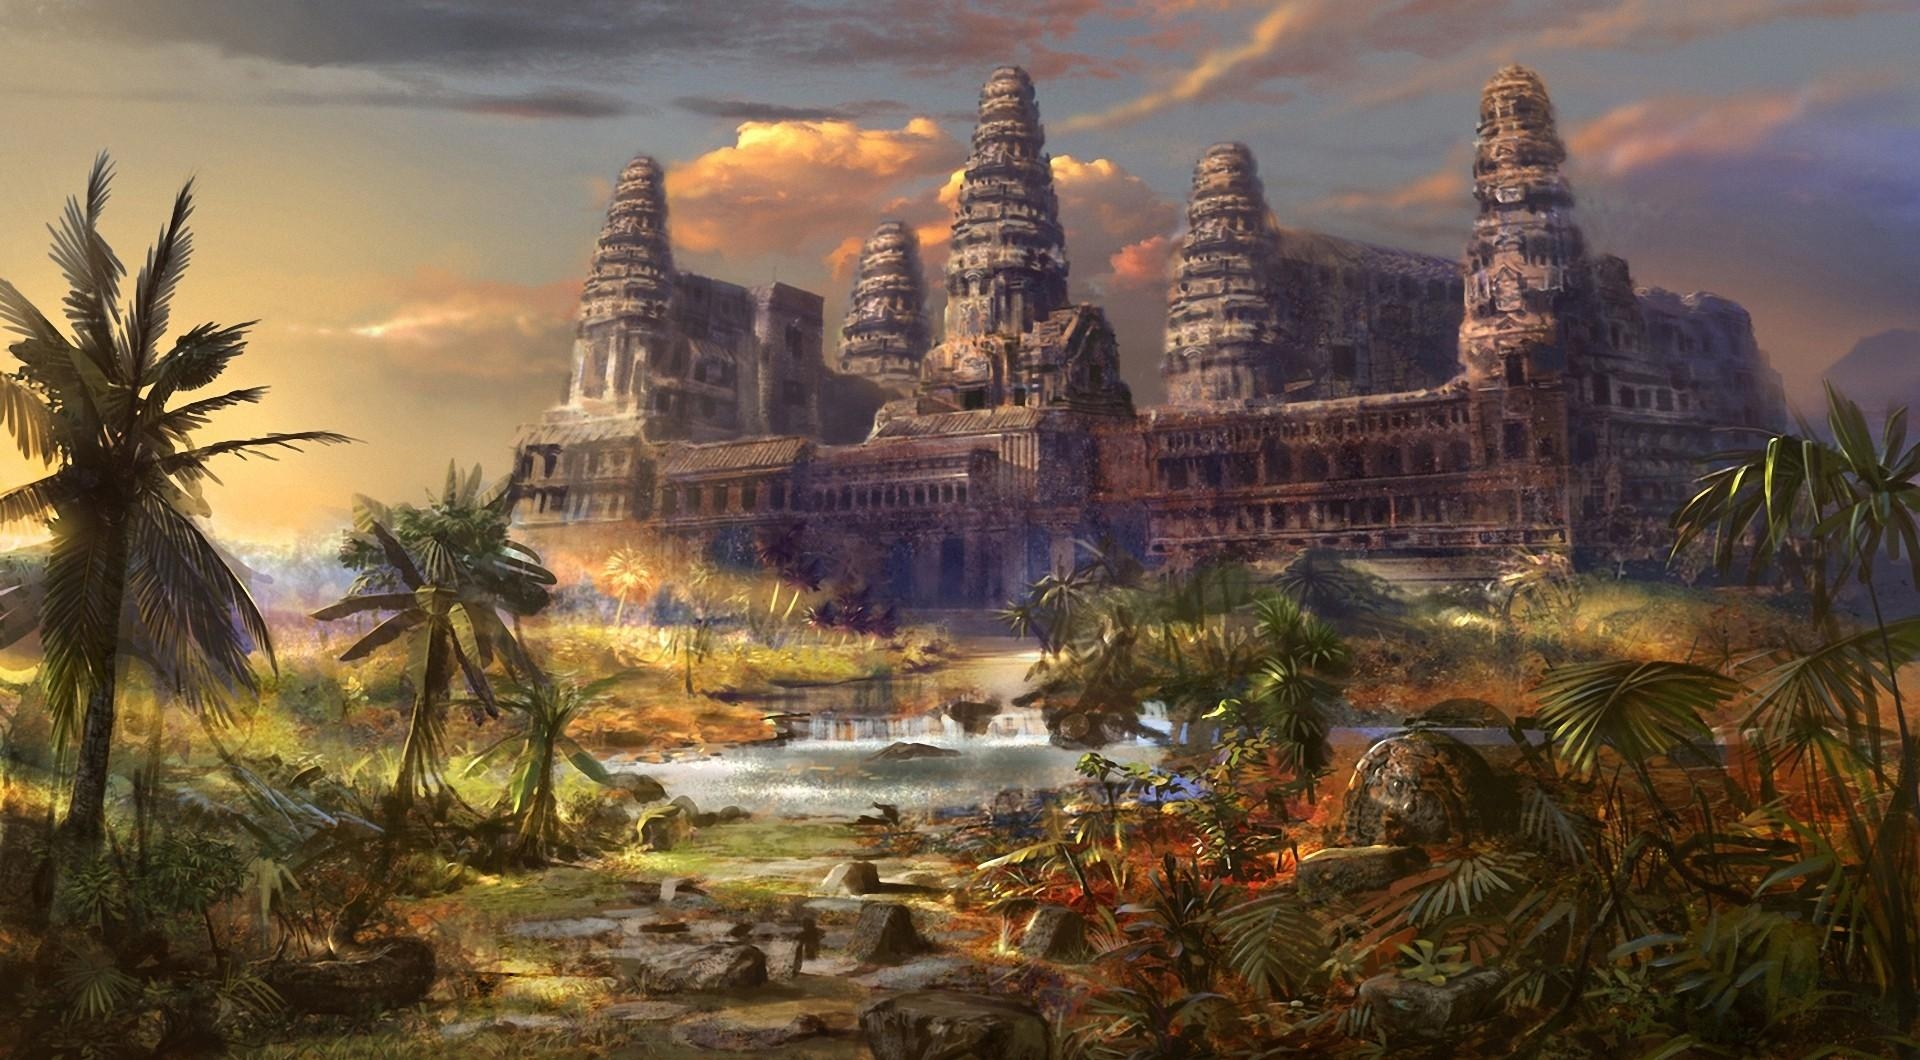 New Lock Screen Wallpapers fantasy, another world, palms, temple, destruction, different world